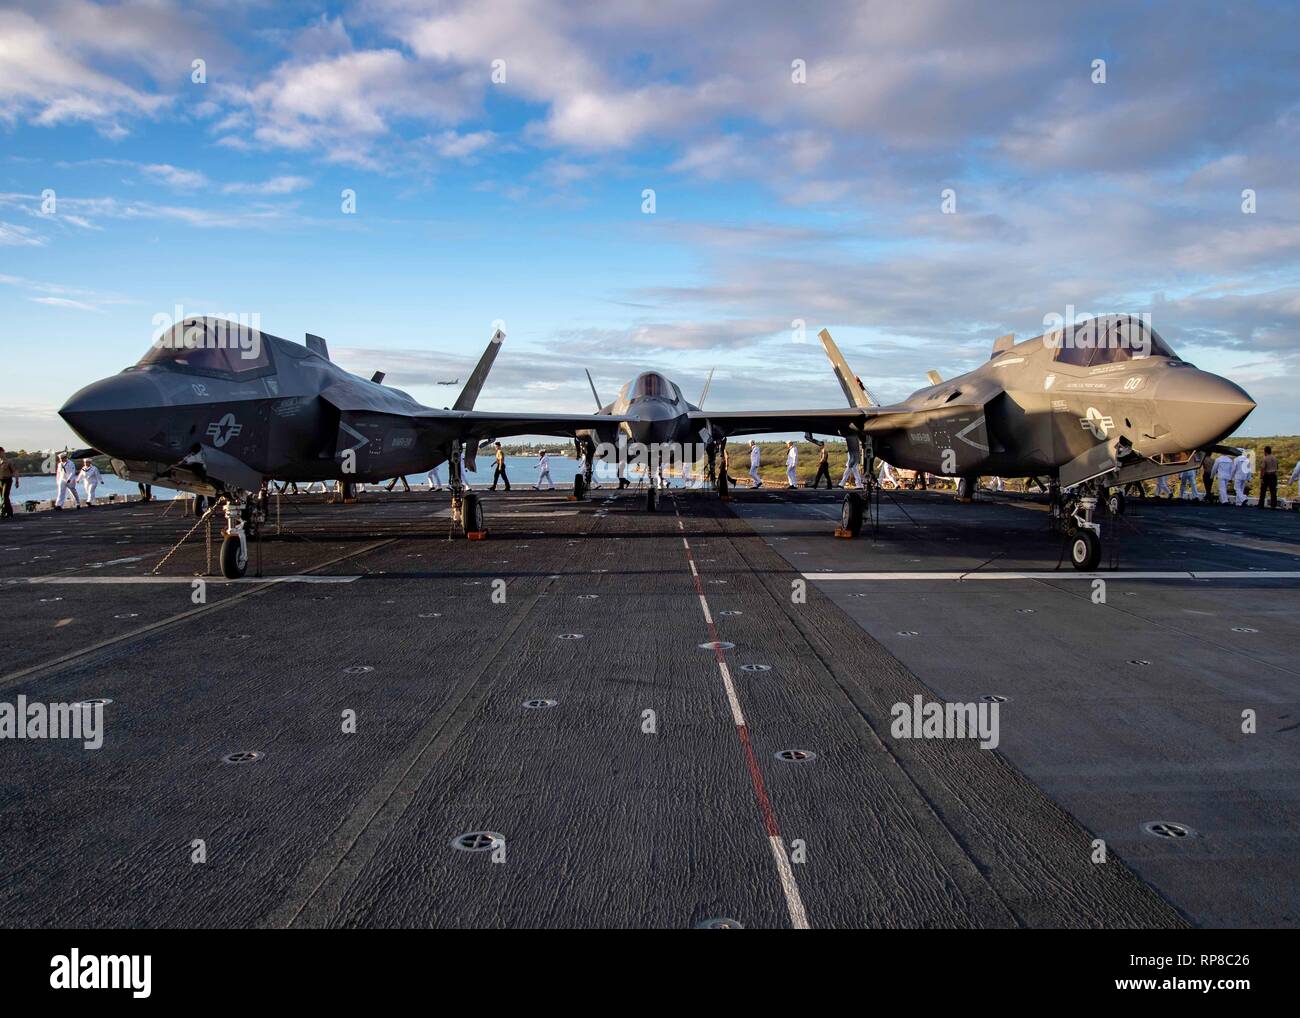 PEARL HARBOR (Feb. 18, 2019) F-35B Lightning II sit on the flight deck while Sailors and Marines prepare to man the rails of Wasp-class amphibious assault ship USS Essex (LHD 2) as it pulls into Pearl Harbor during a deployment of Essex Amphibious Ready Group (ARG) and 13th Marine Expeditionary Unit (MEU). The Essex ARG/MEU team is a strong and flexible force equipped and scalable to respond to any crisis ranging from humanitarian assistance and disaster relief to contingency operations. The Essex ARG and 13th MEU is the first continental United States Navy/Marine Corps team to deploy with the Stock Photo